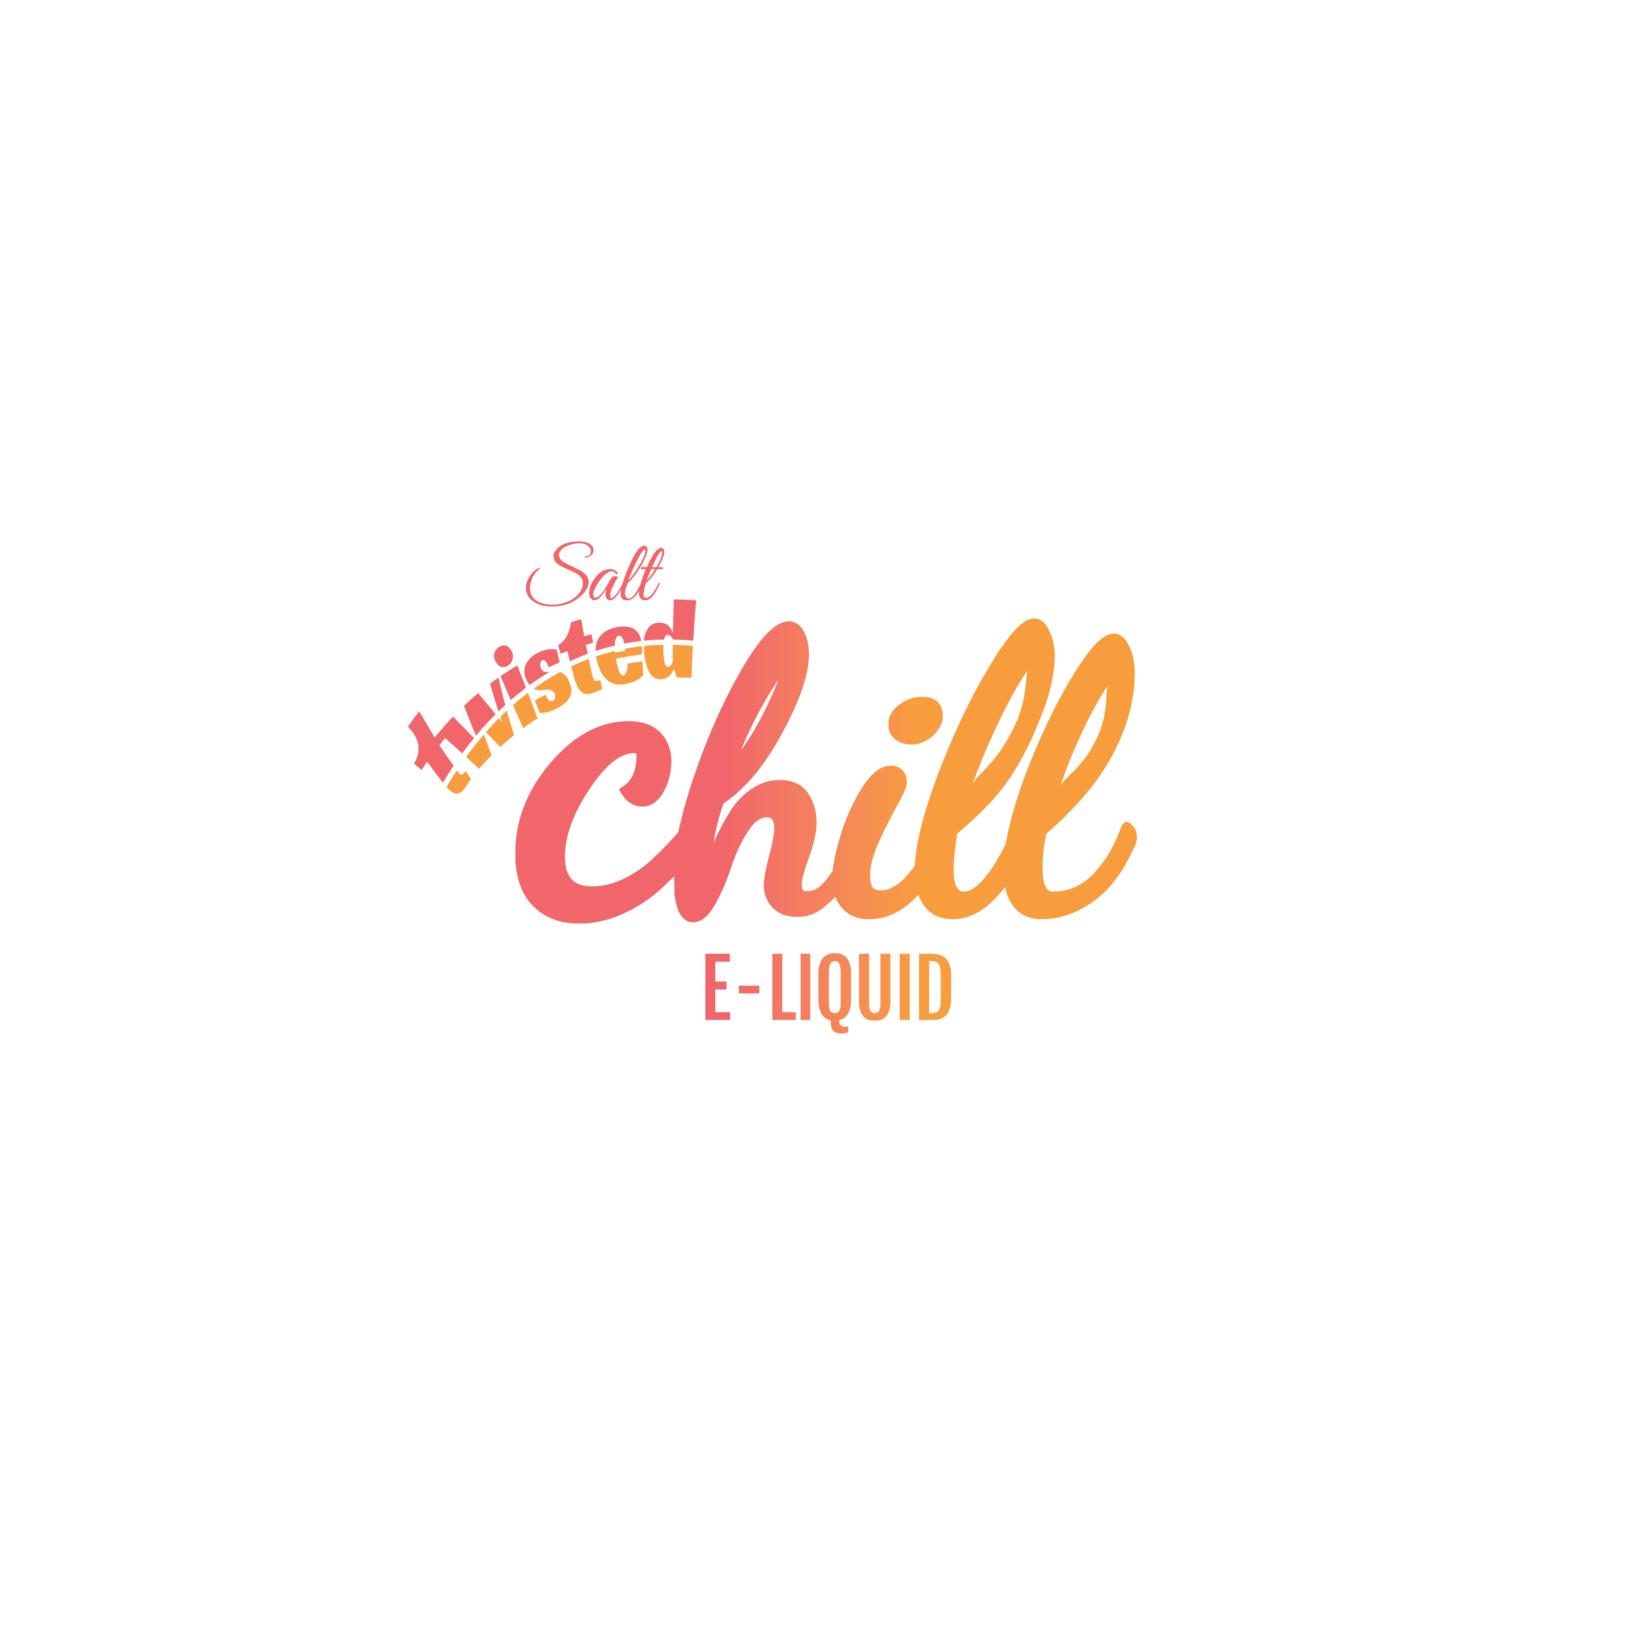 CHILL TWISTED Chill Twisted - SALT NICOTINE